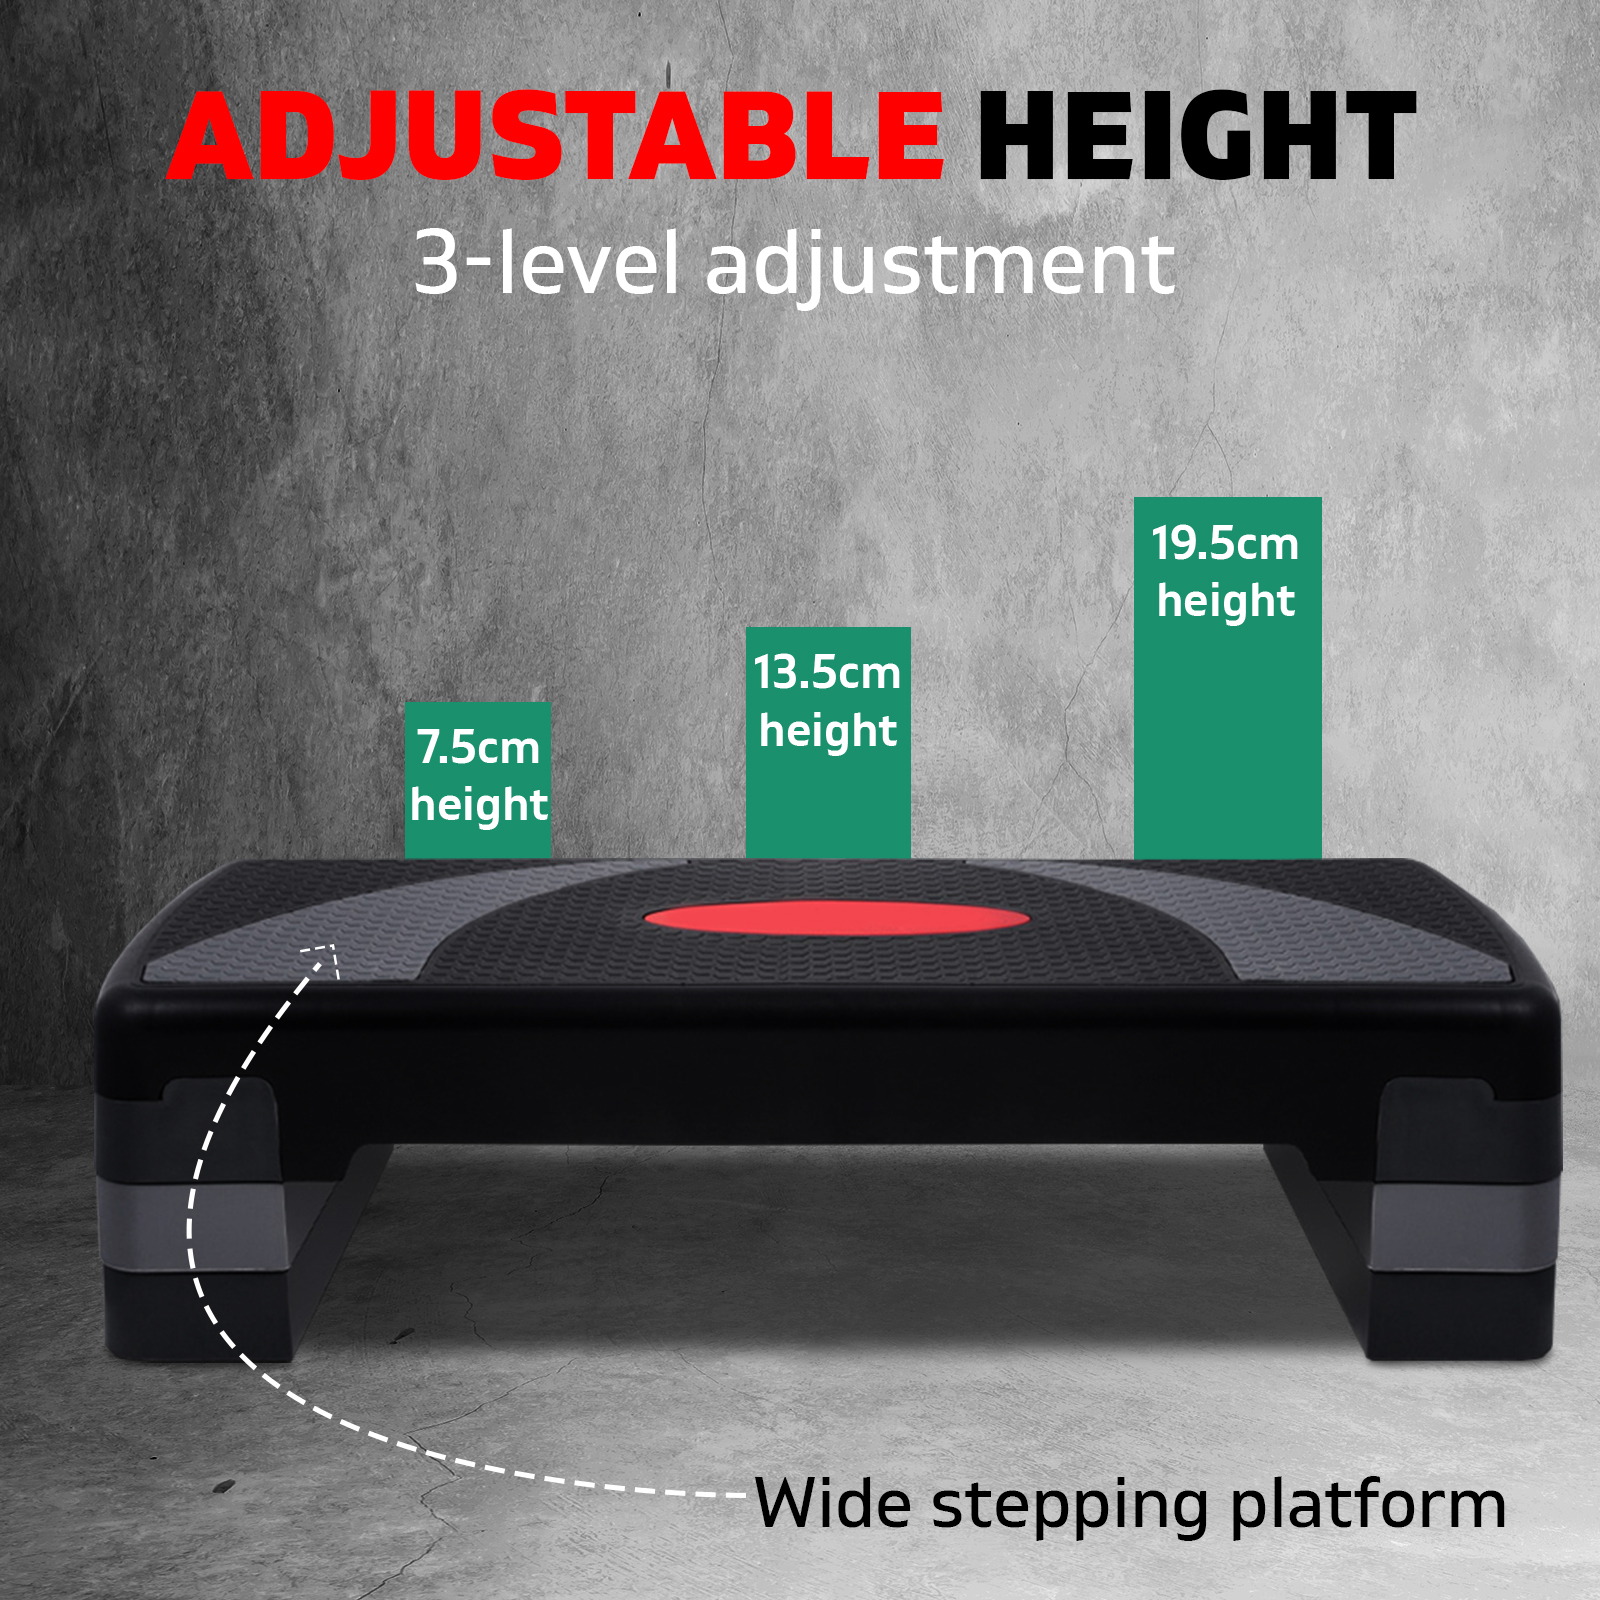 Aerobic Step Bench Exercise Wide Stepping Platform Workout 250kg Capacity